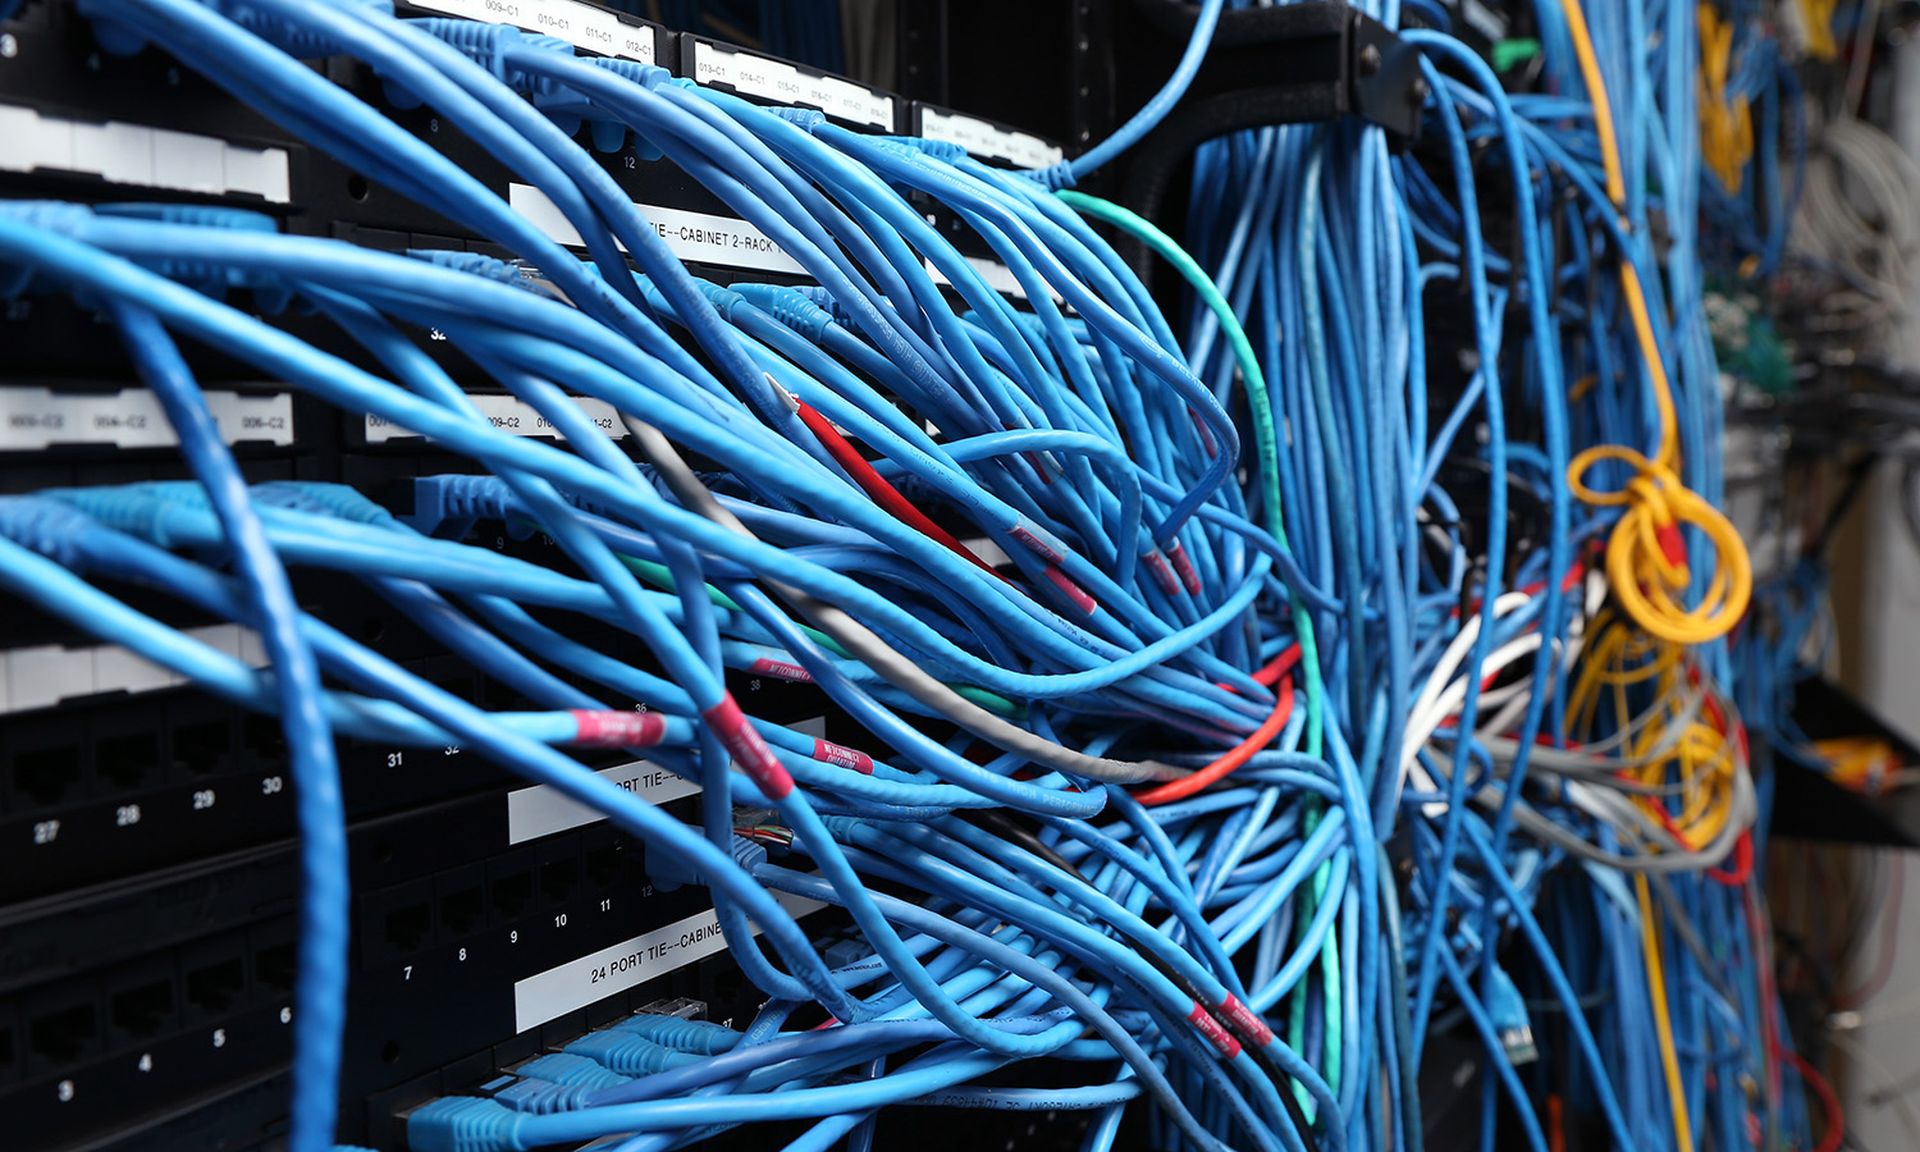 Network cables are plugged in a server room on Nov. 10, 2014, in New York City. (Photo by Michael Bocchieri/Getty Images)